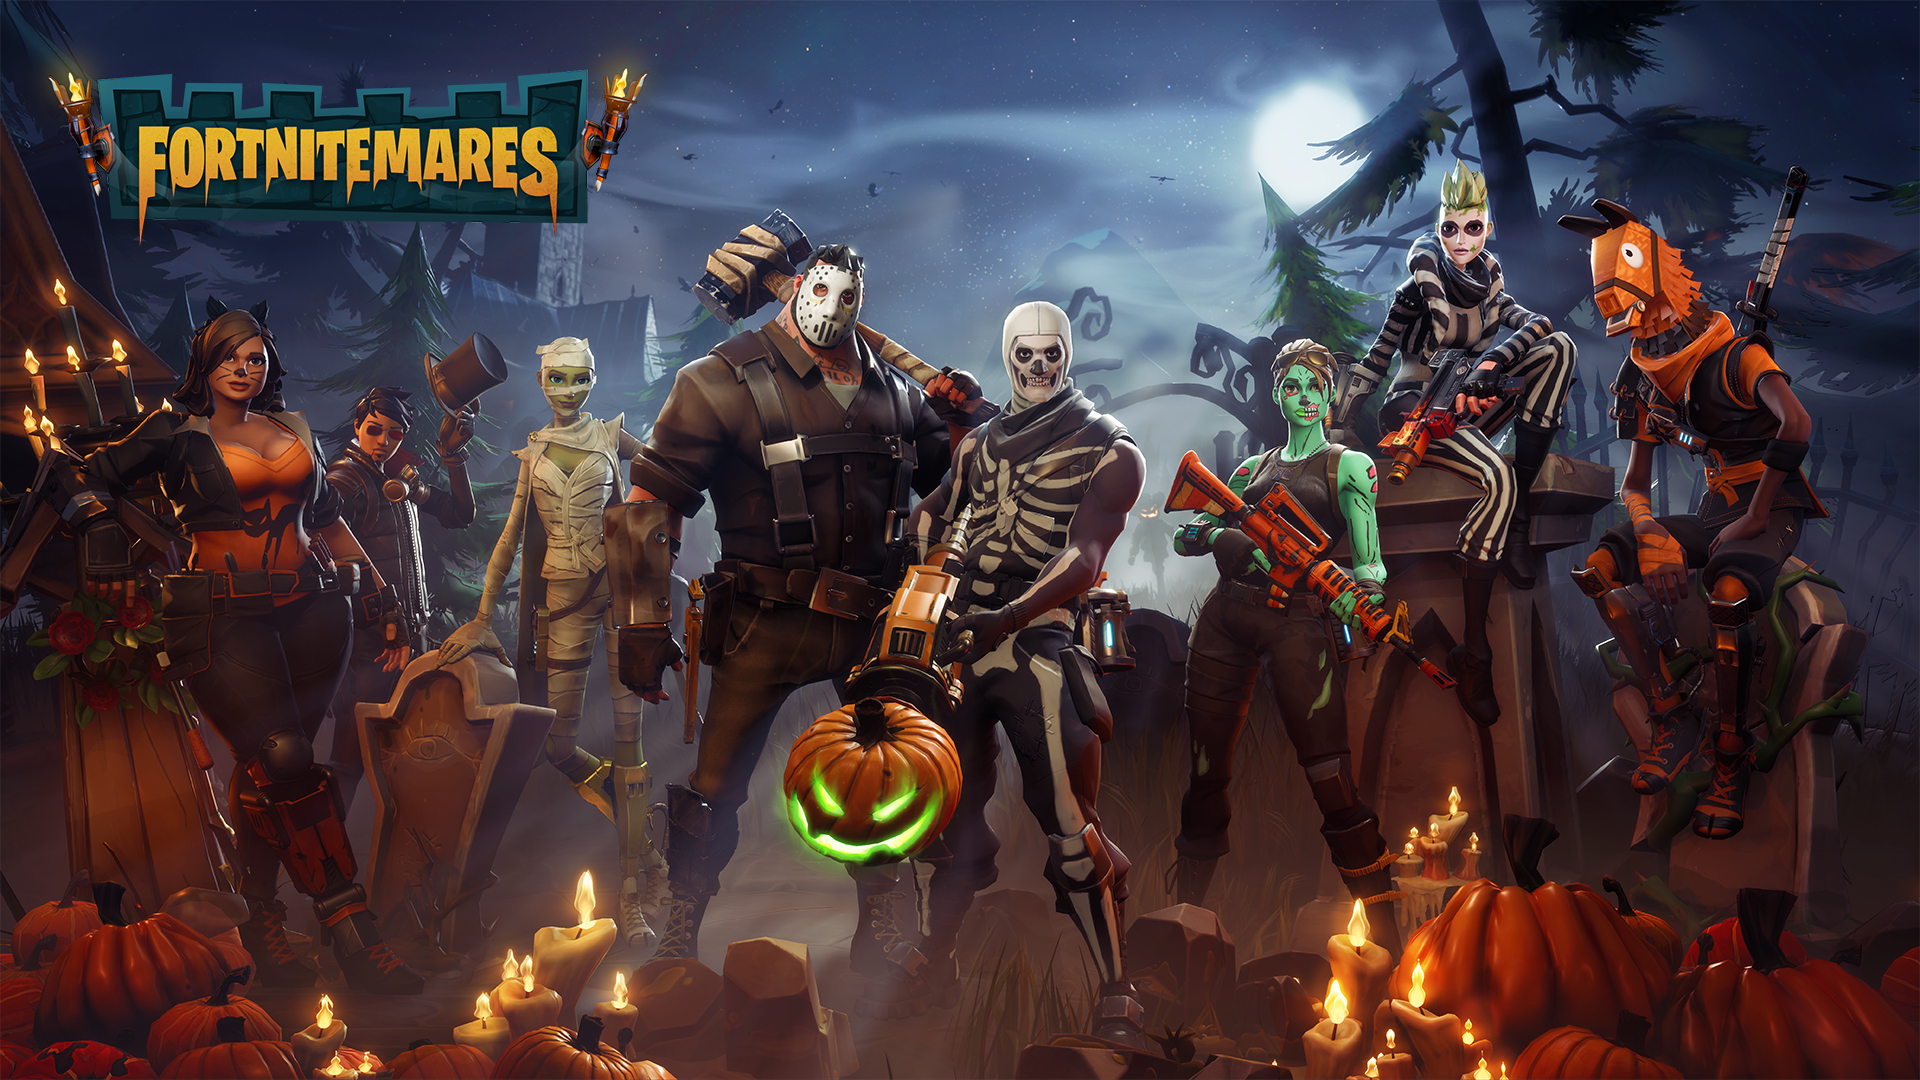 Fortnite Gets Spooky With Fortnitemares Update